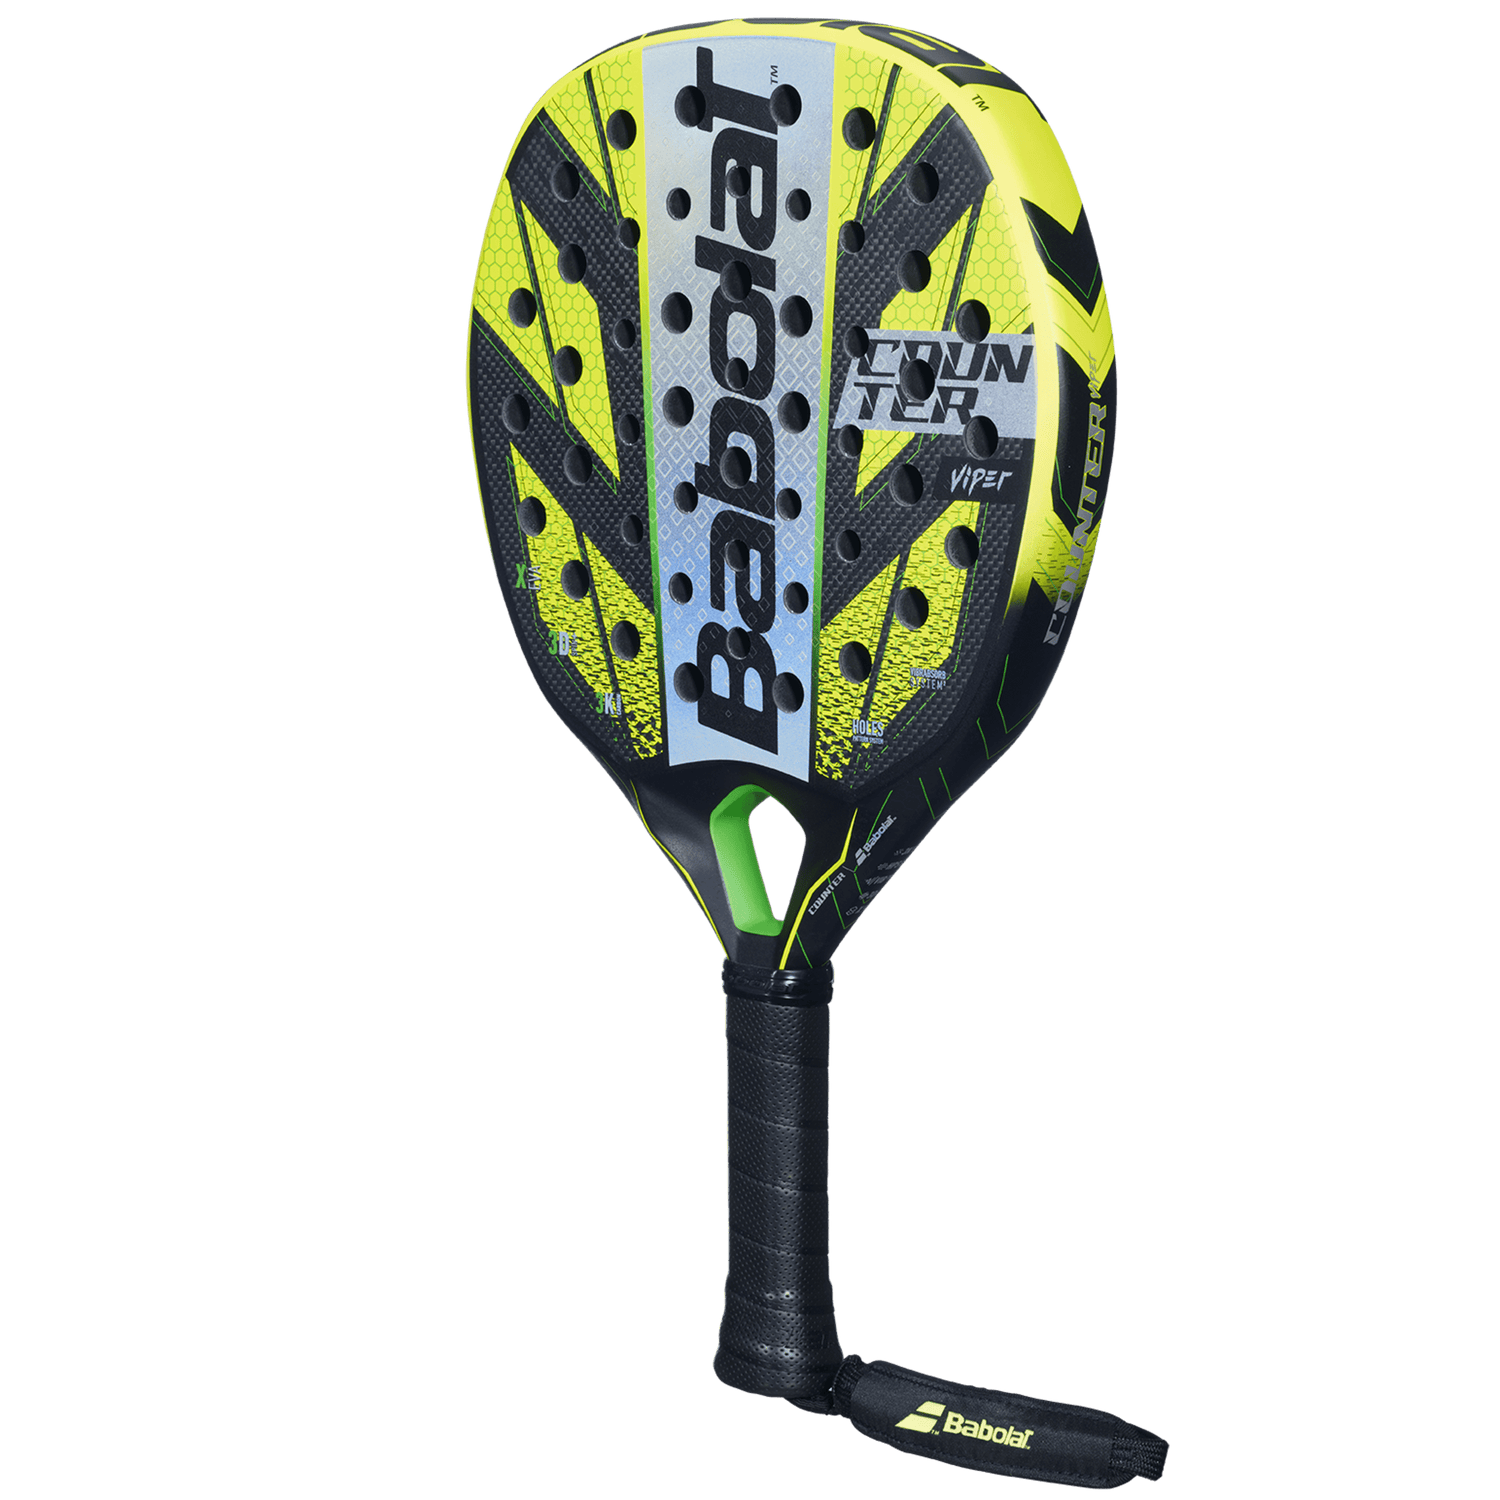 A padel racket for counter-attackers.